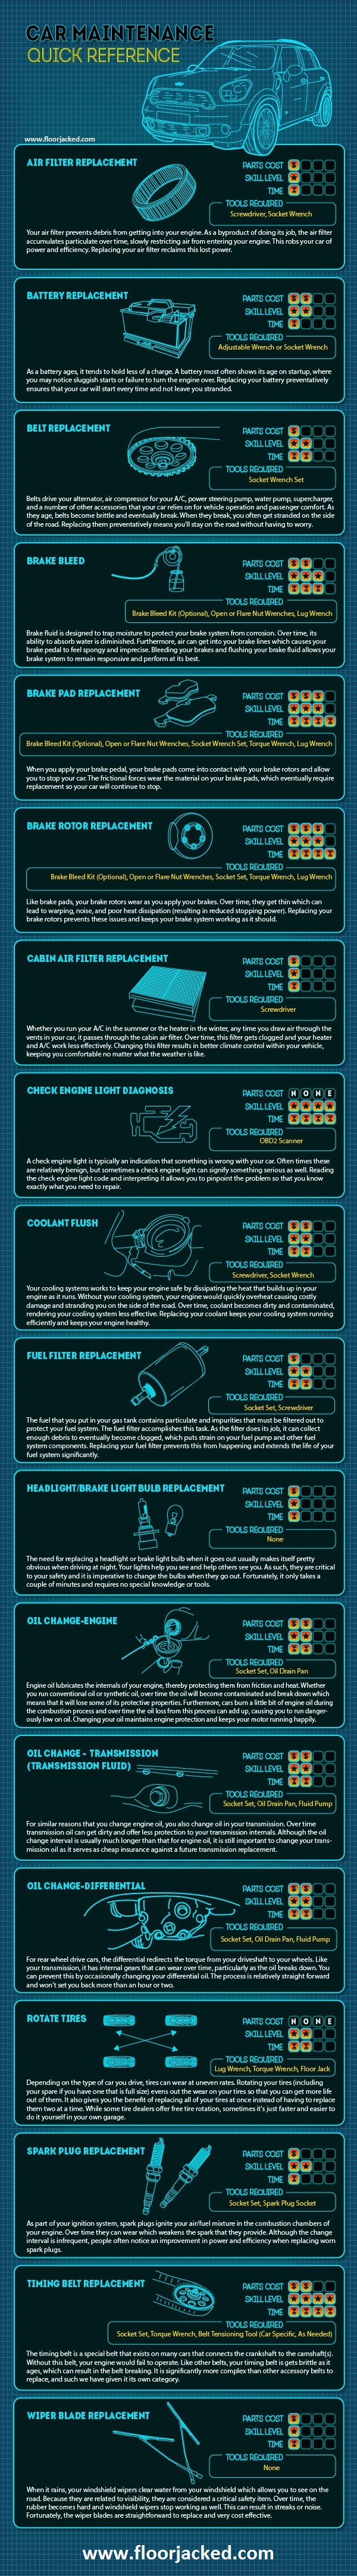 Car Maintenance Quick Reference Infographic